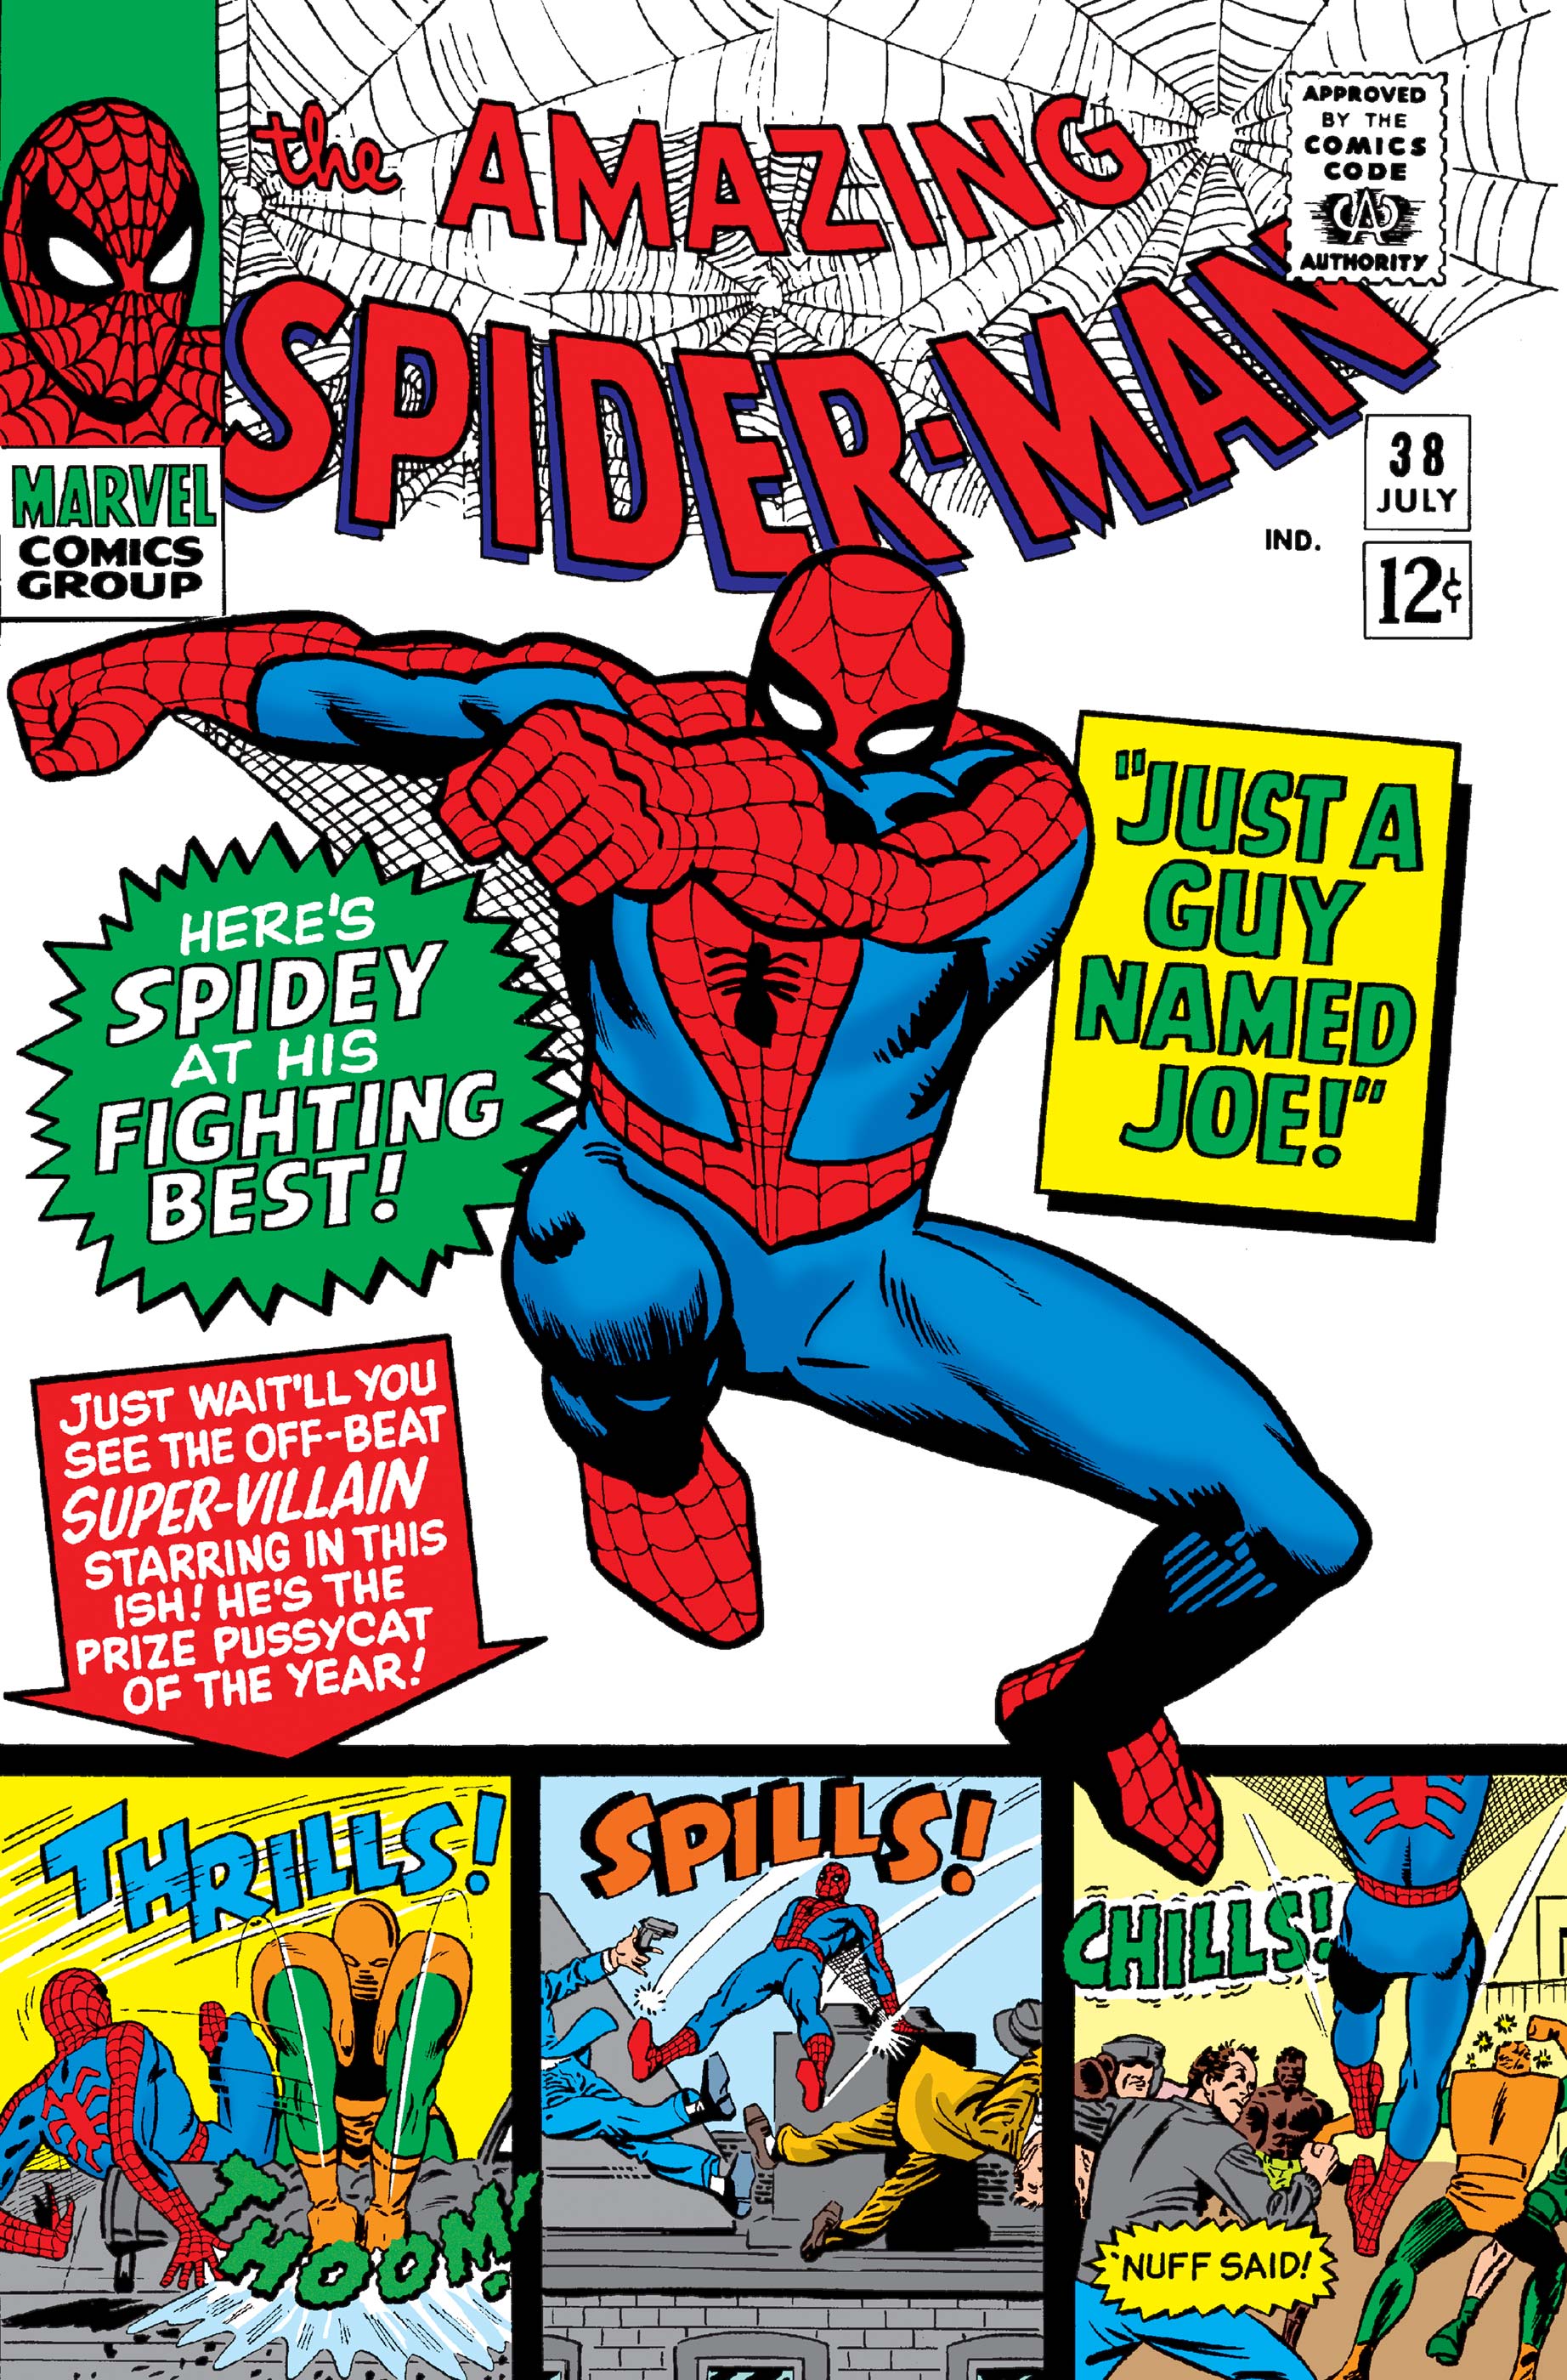 The Amazing Spider-Man (1963) #39, Comic Issues